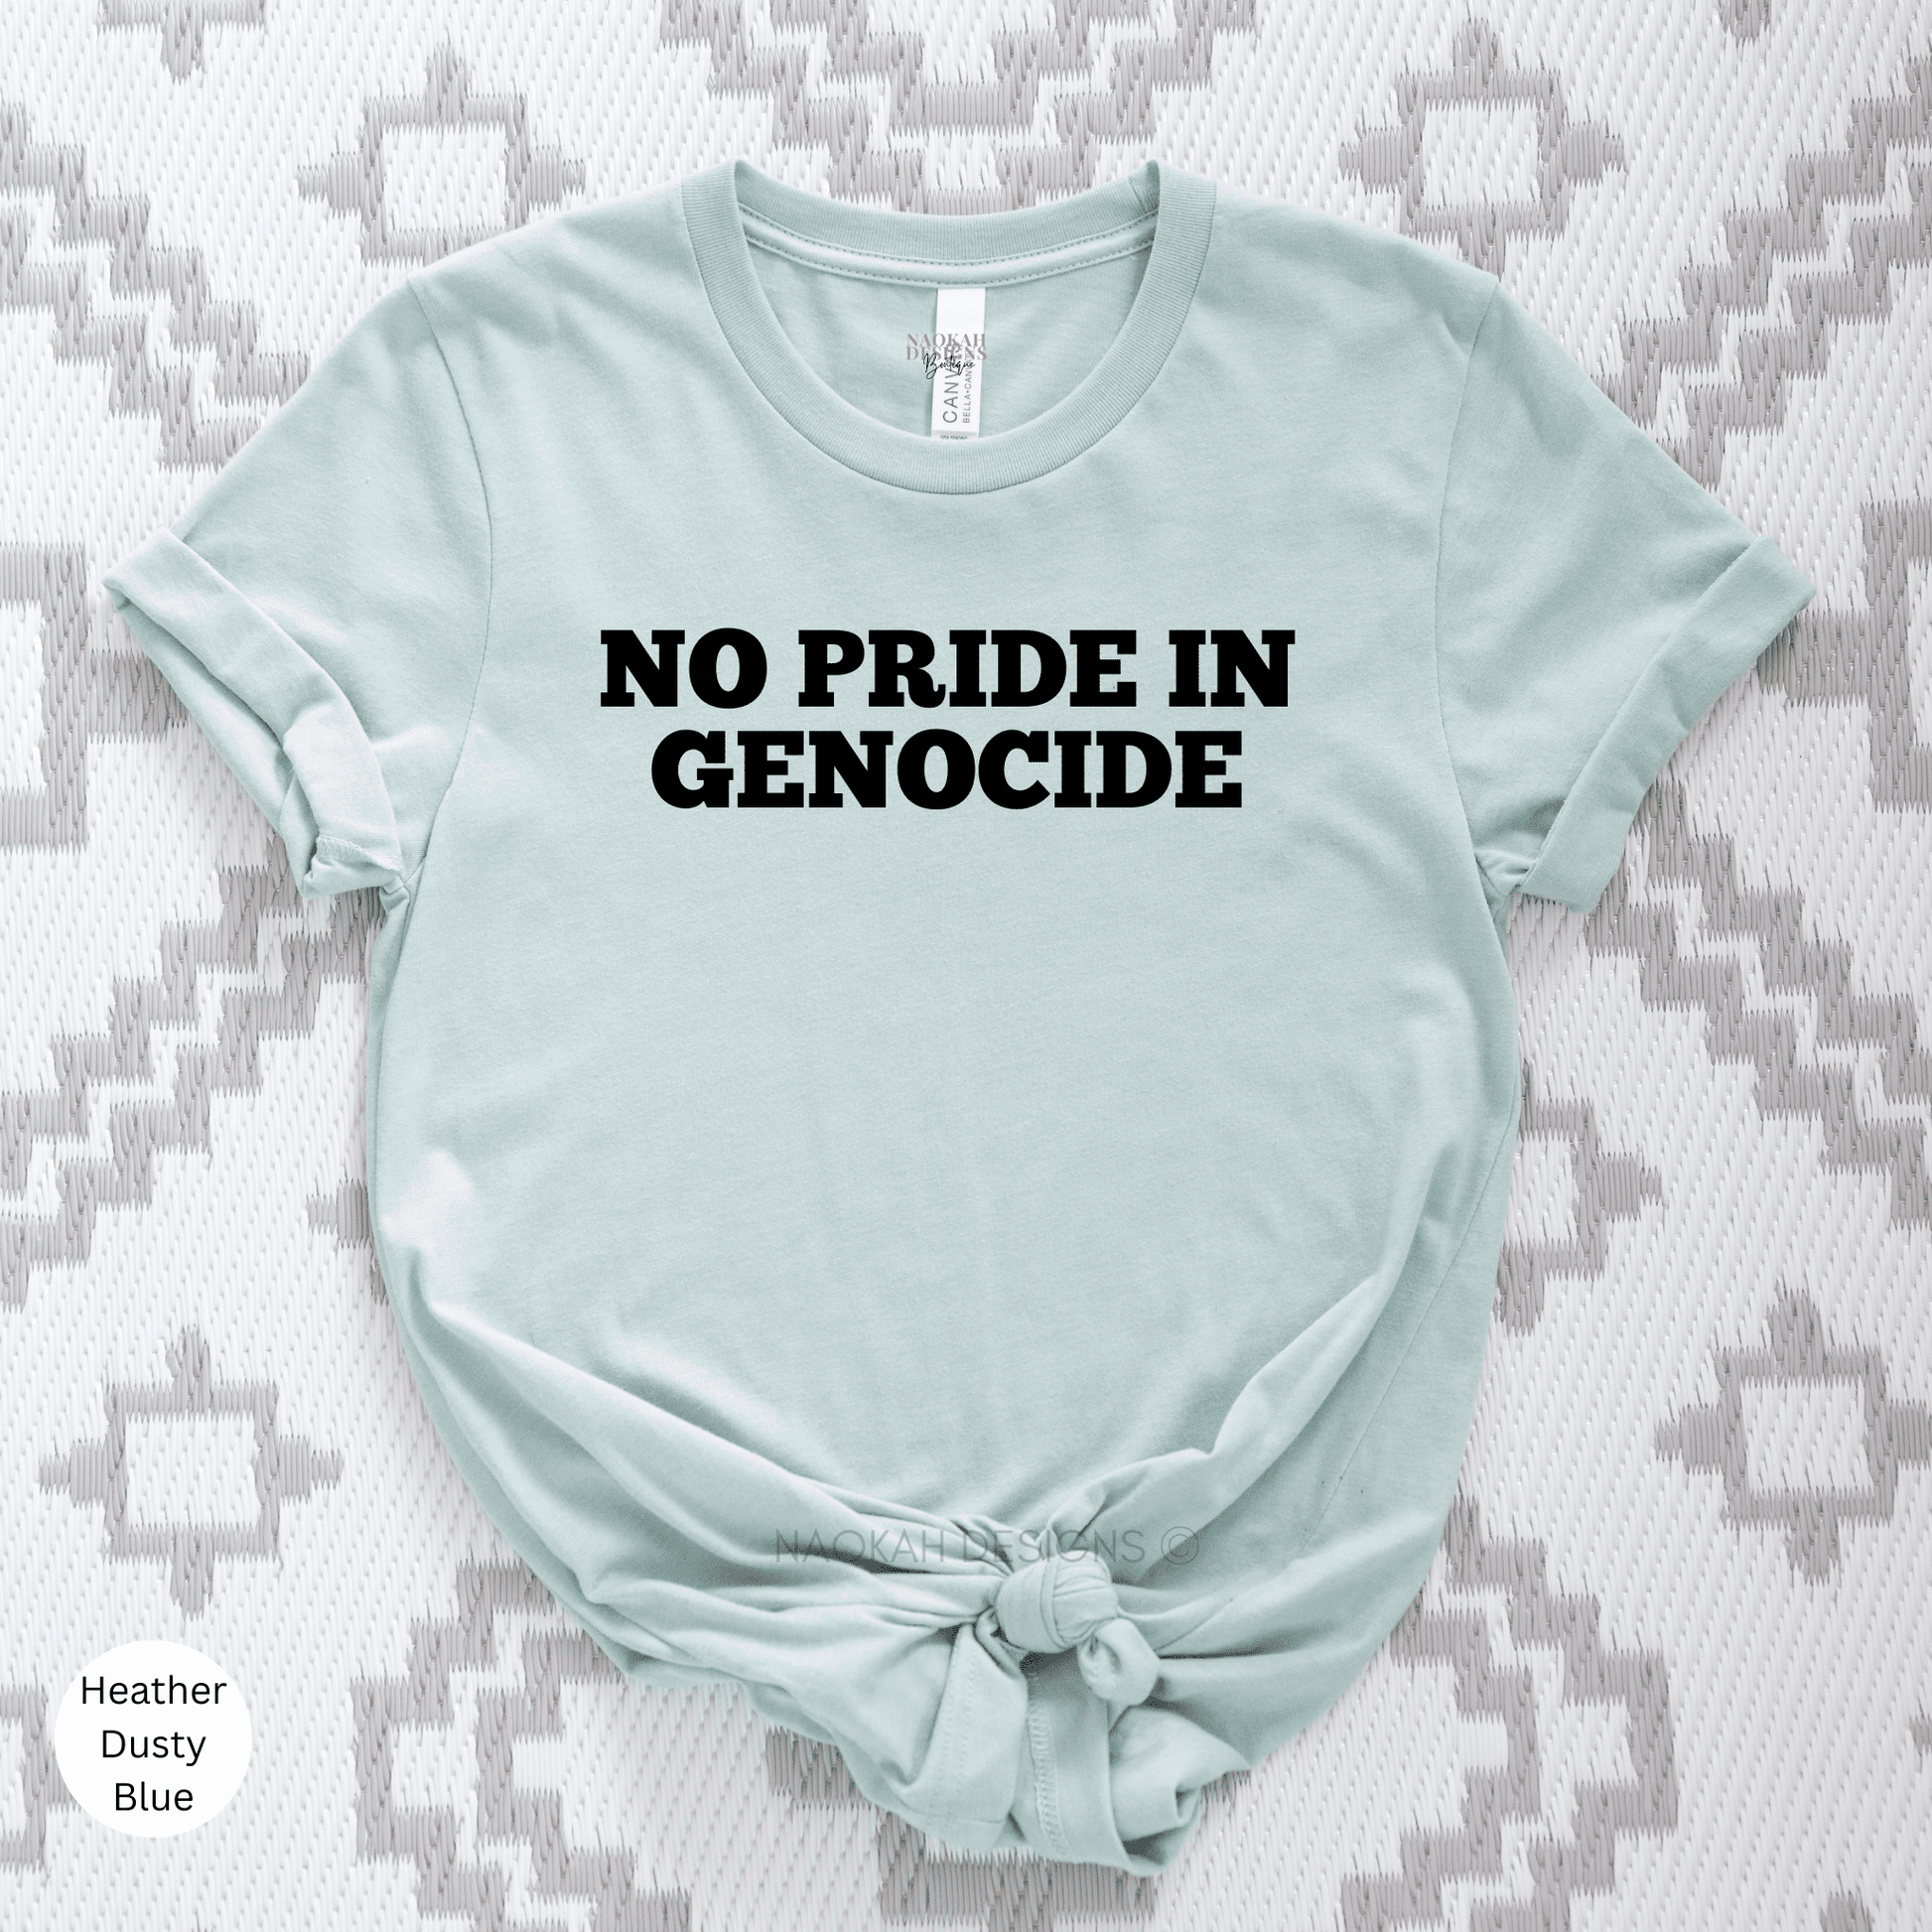 No Pride in Genocide Shirt, Indigenous Owned, No One is Illegal, Decolonize Shirt, Native Land, Orange Day Gift, Indigenous Day